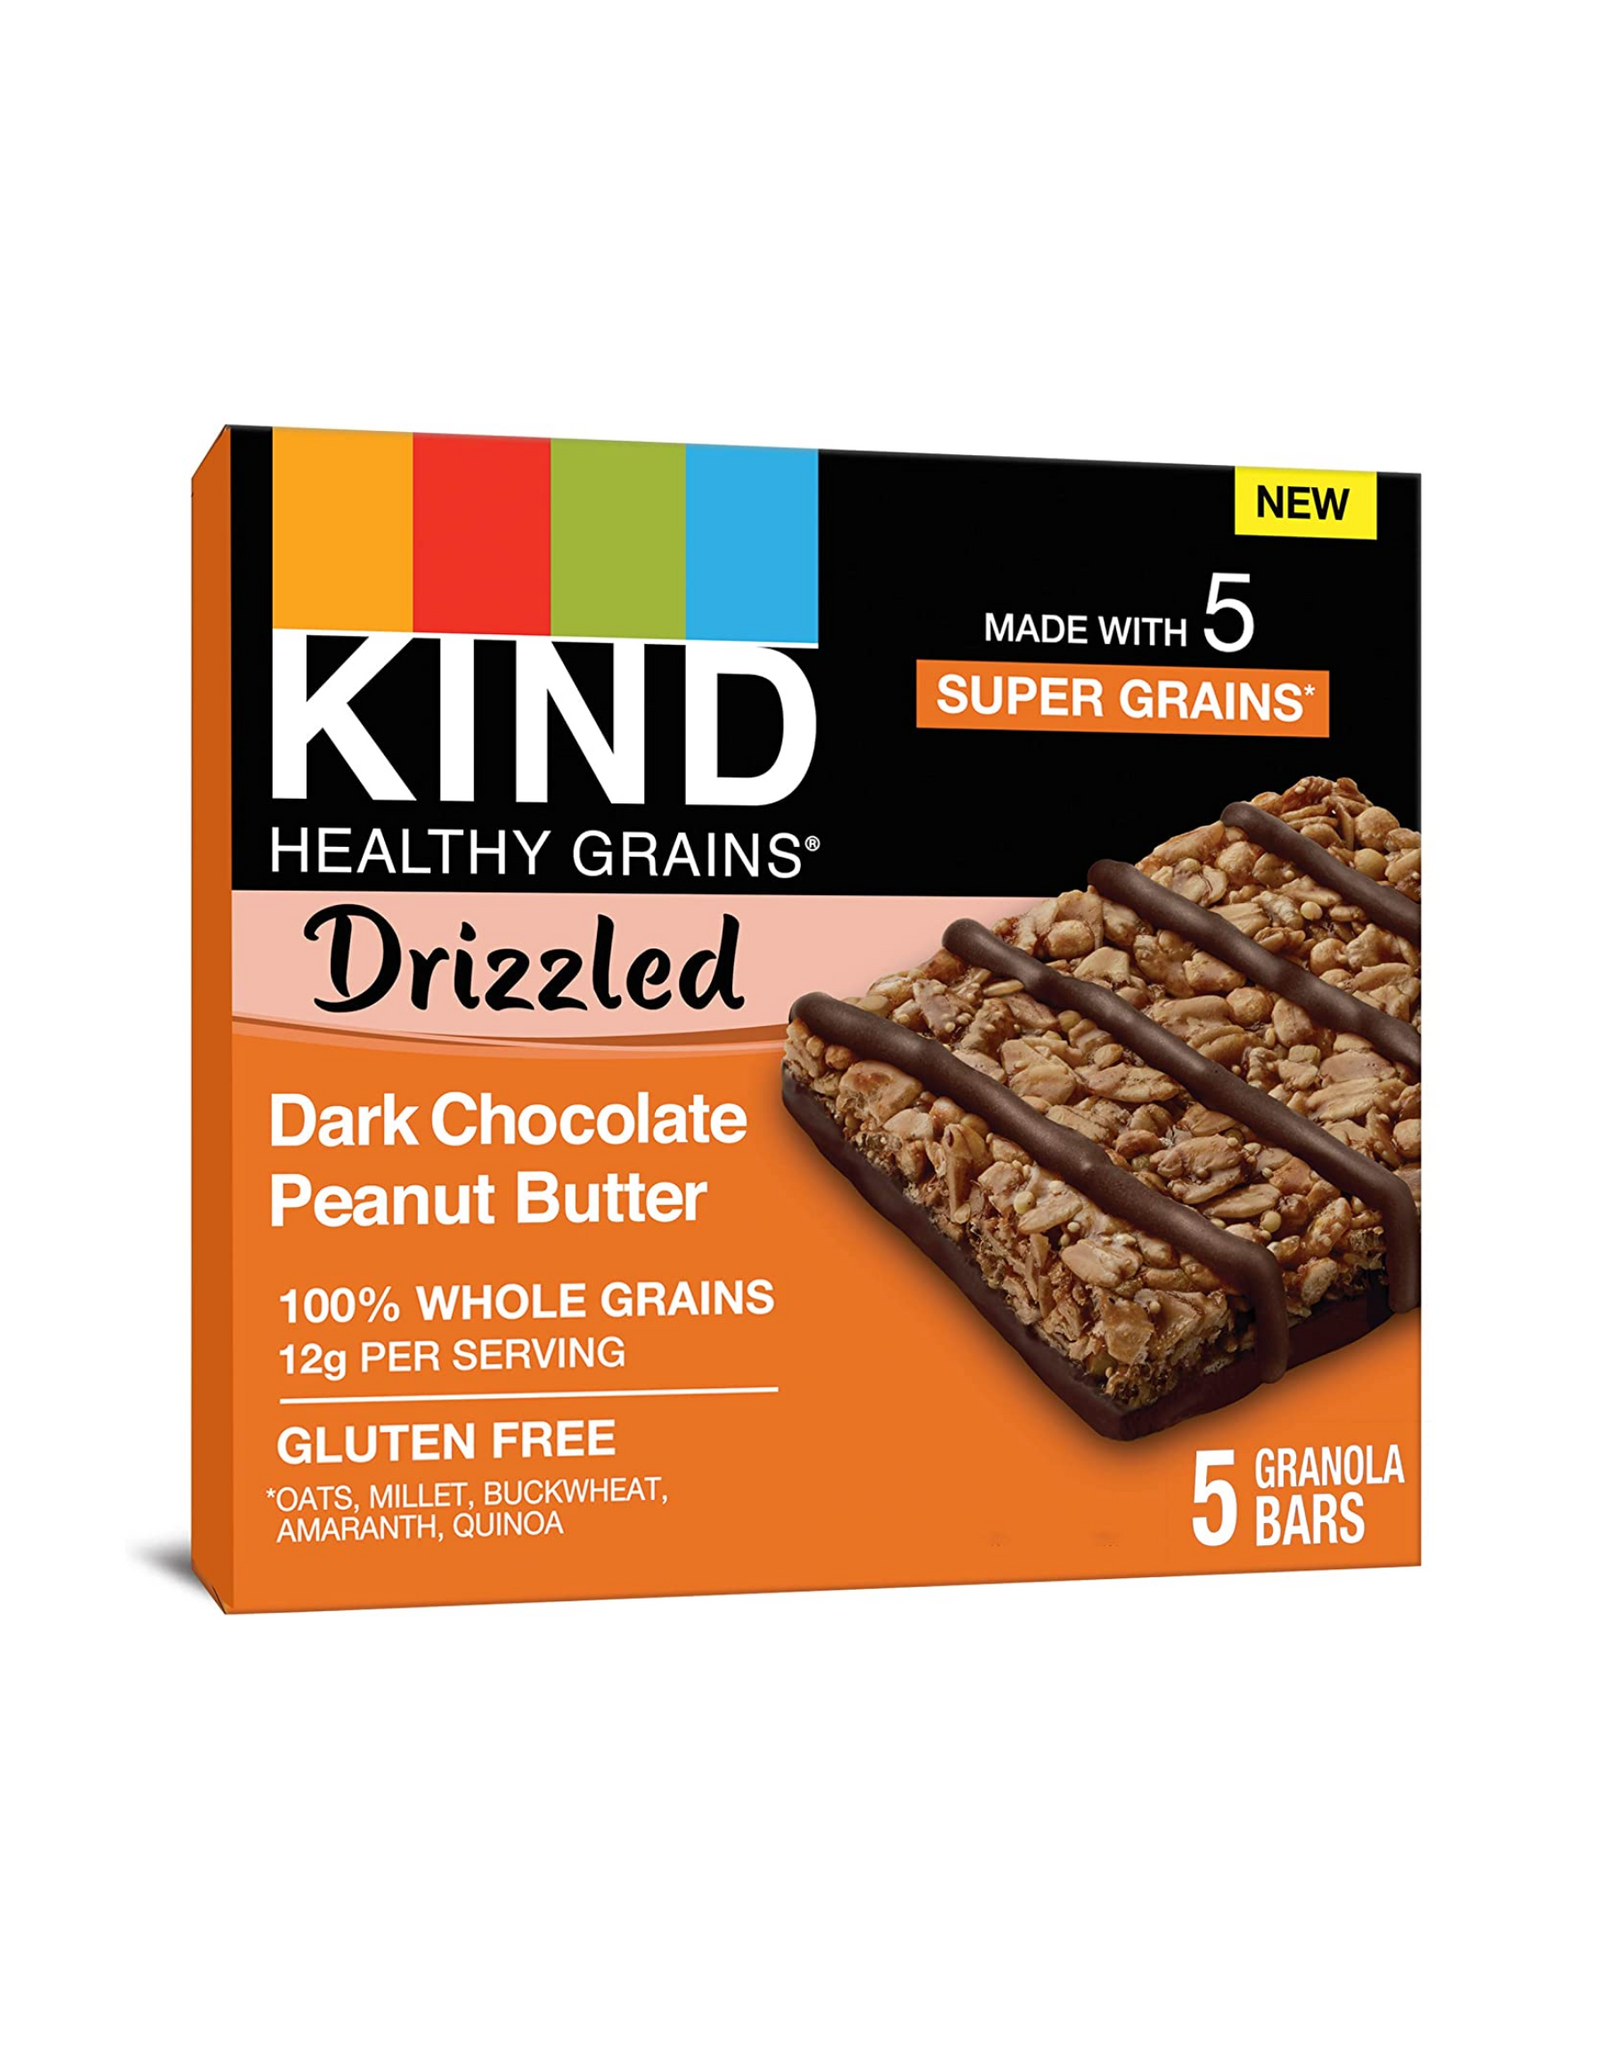 KIND Healthy Grains Bars Drizzled, Dark Chocolate Peanut Butter, Whole Grains, Gluten Free, 1.2 oz, 40 Ct in total (Pack of 8)